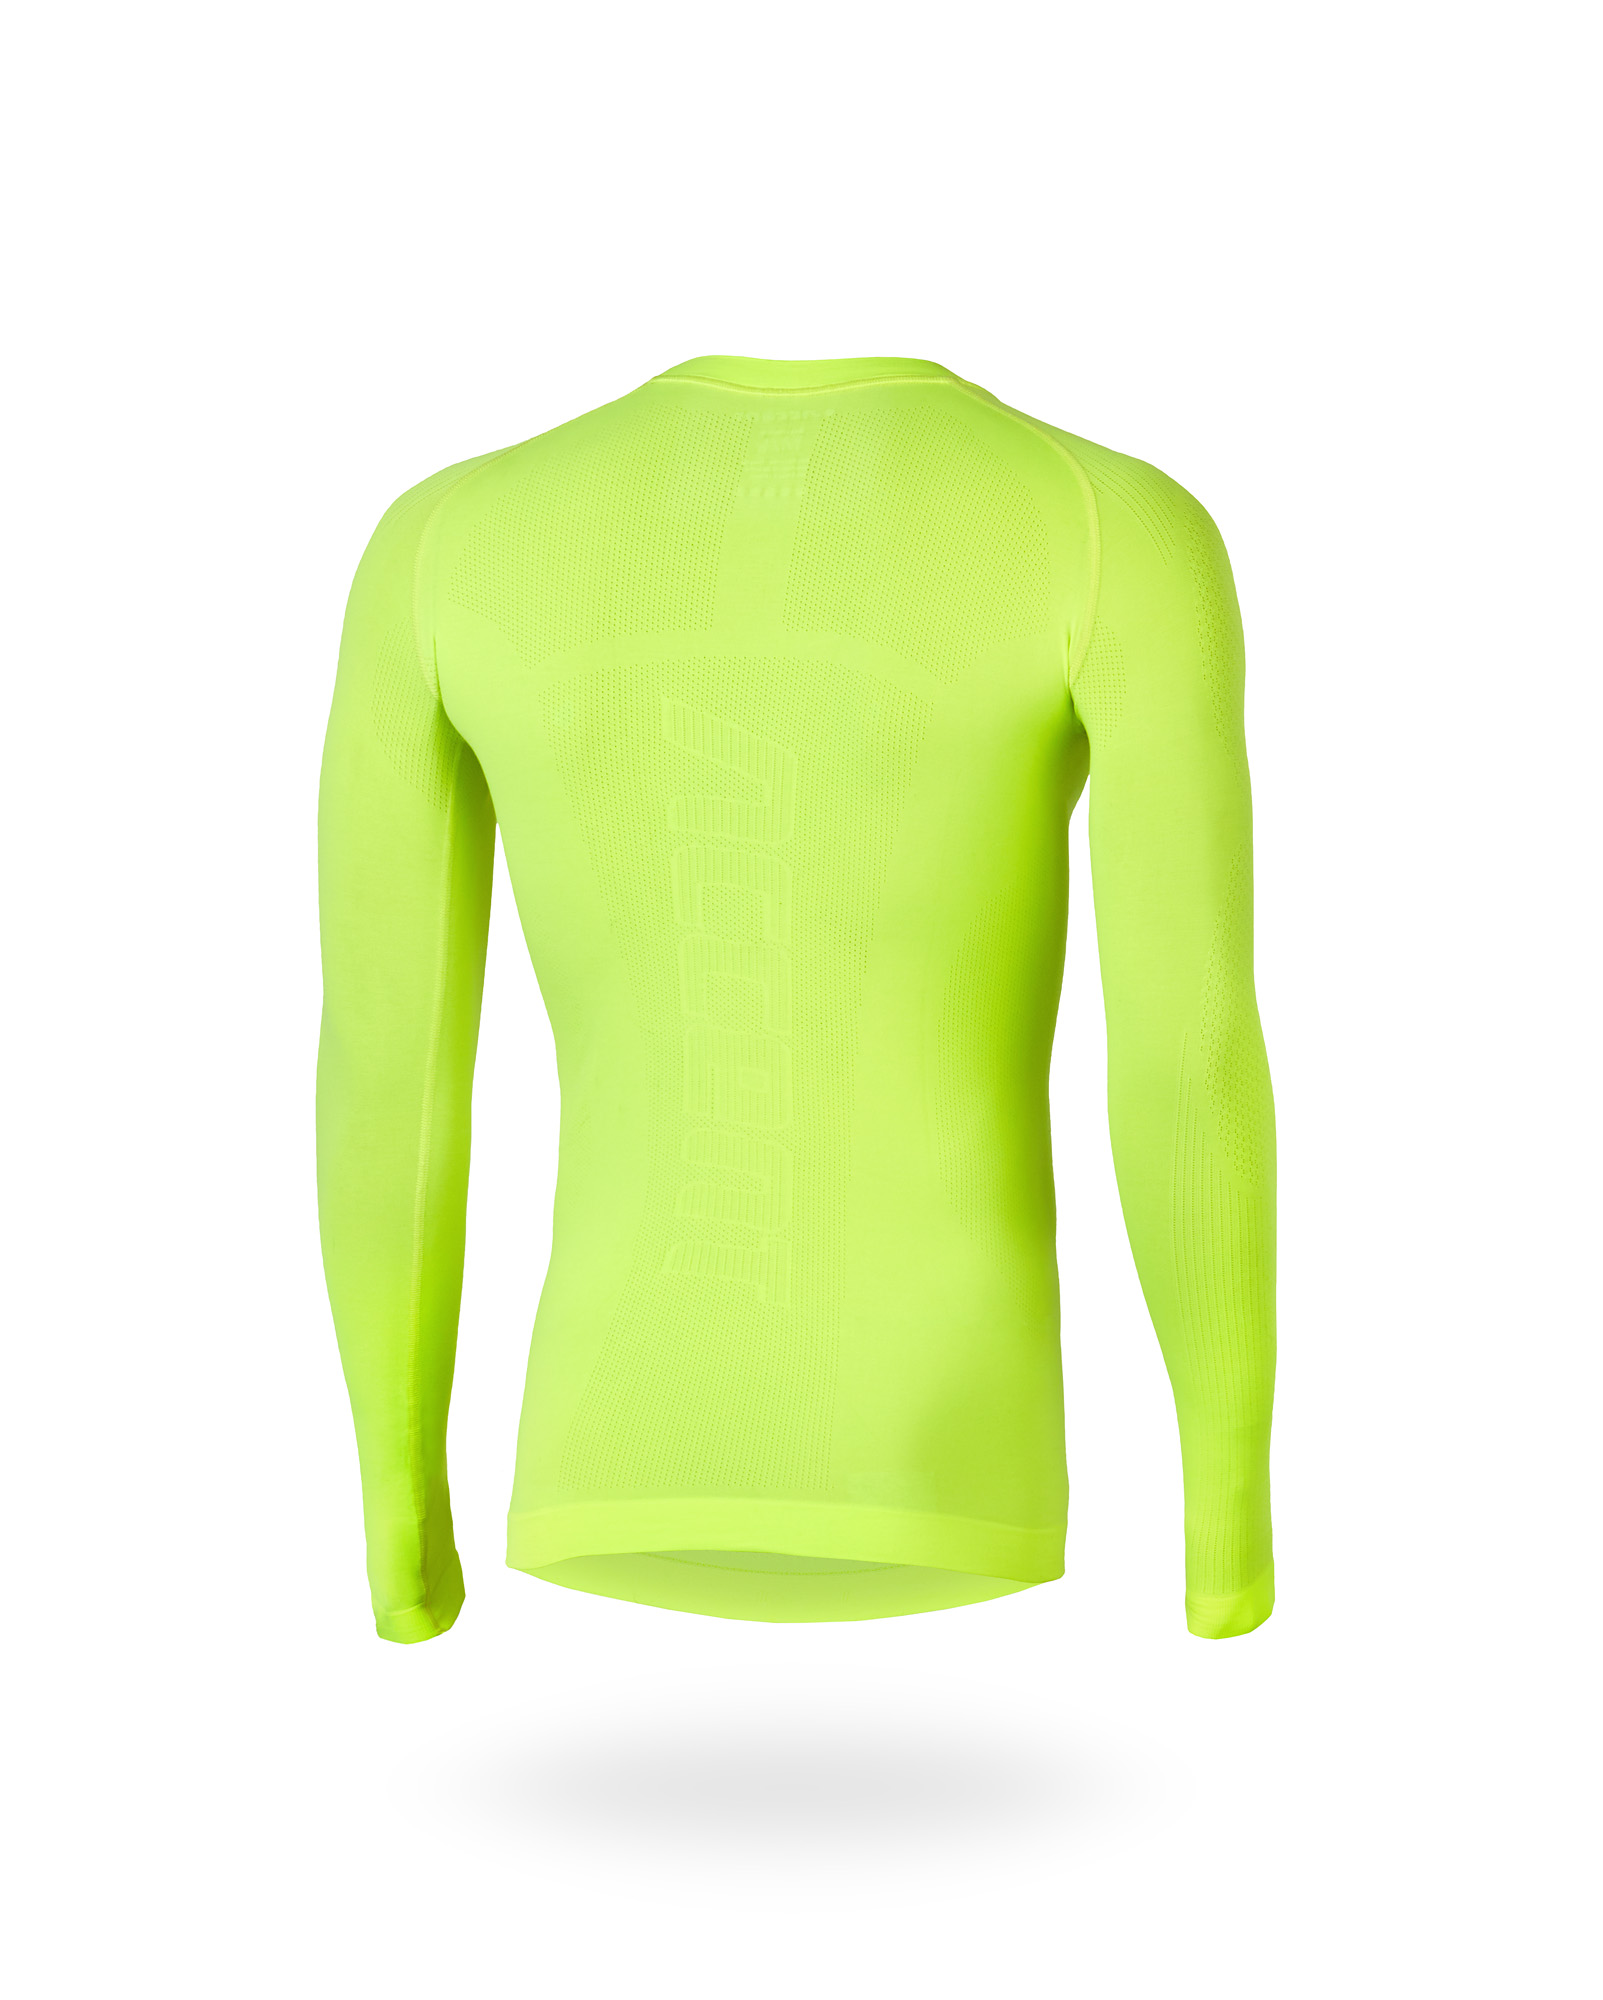 ACCENT_baselayer_Ultra_Yellow_40A8585